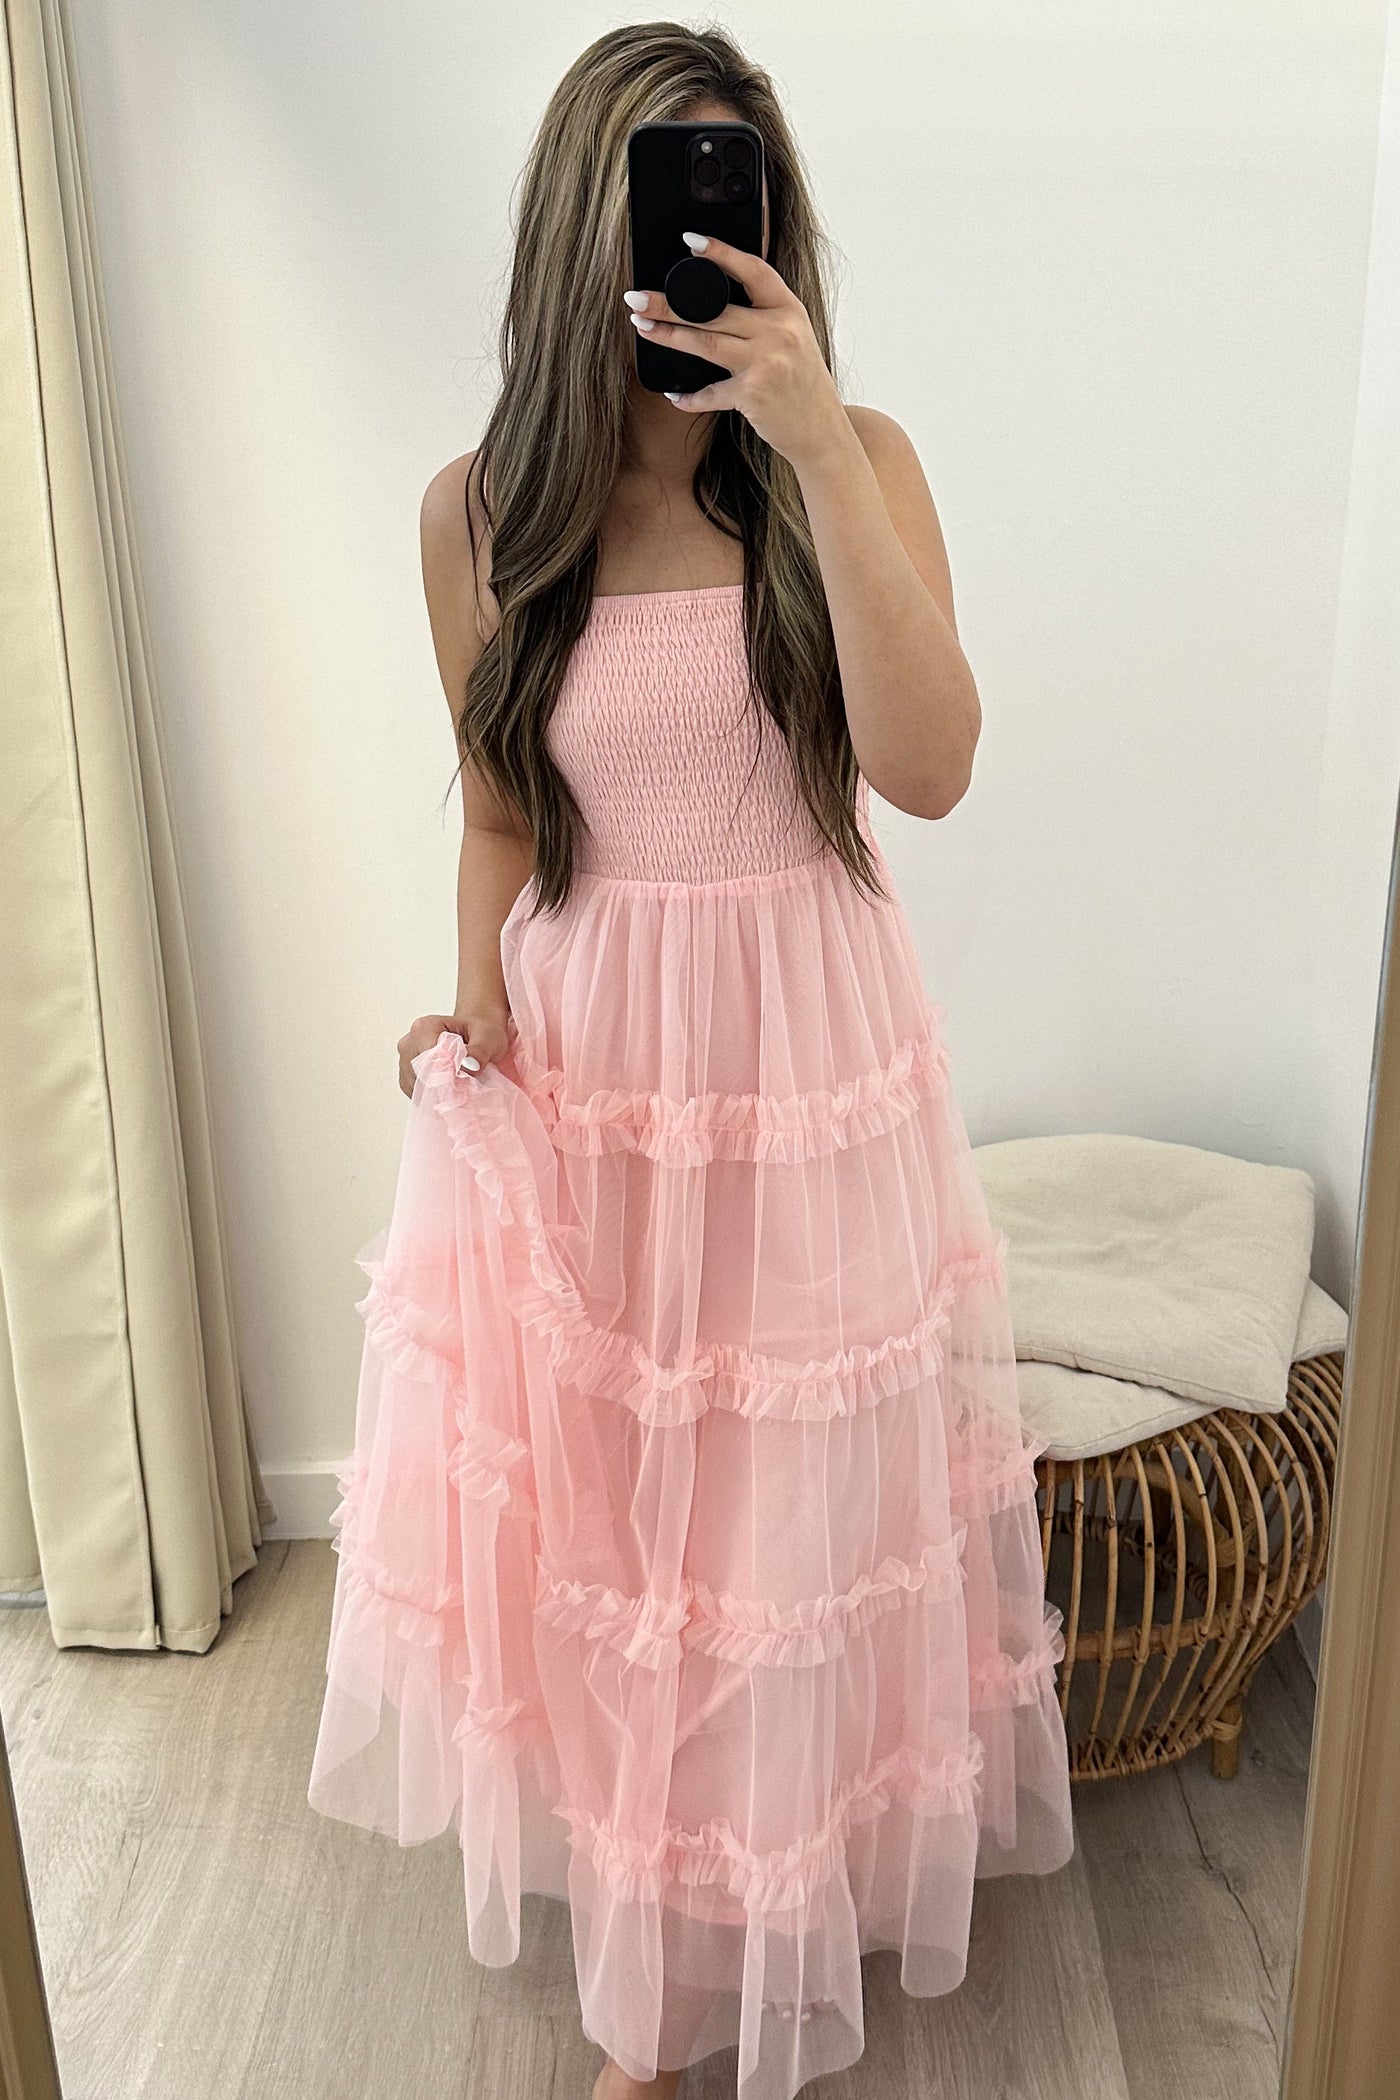 "Settle The Score" Dress (Peach Blush) - Happily Ever Aften